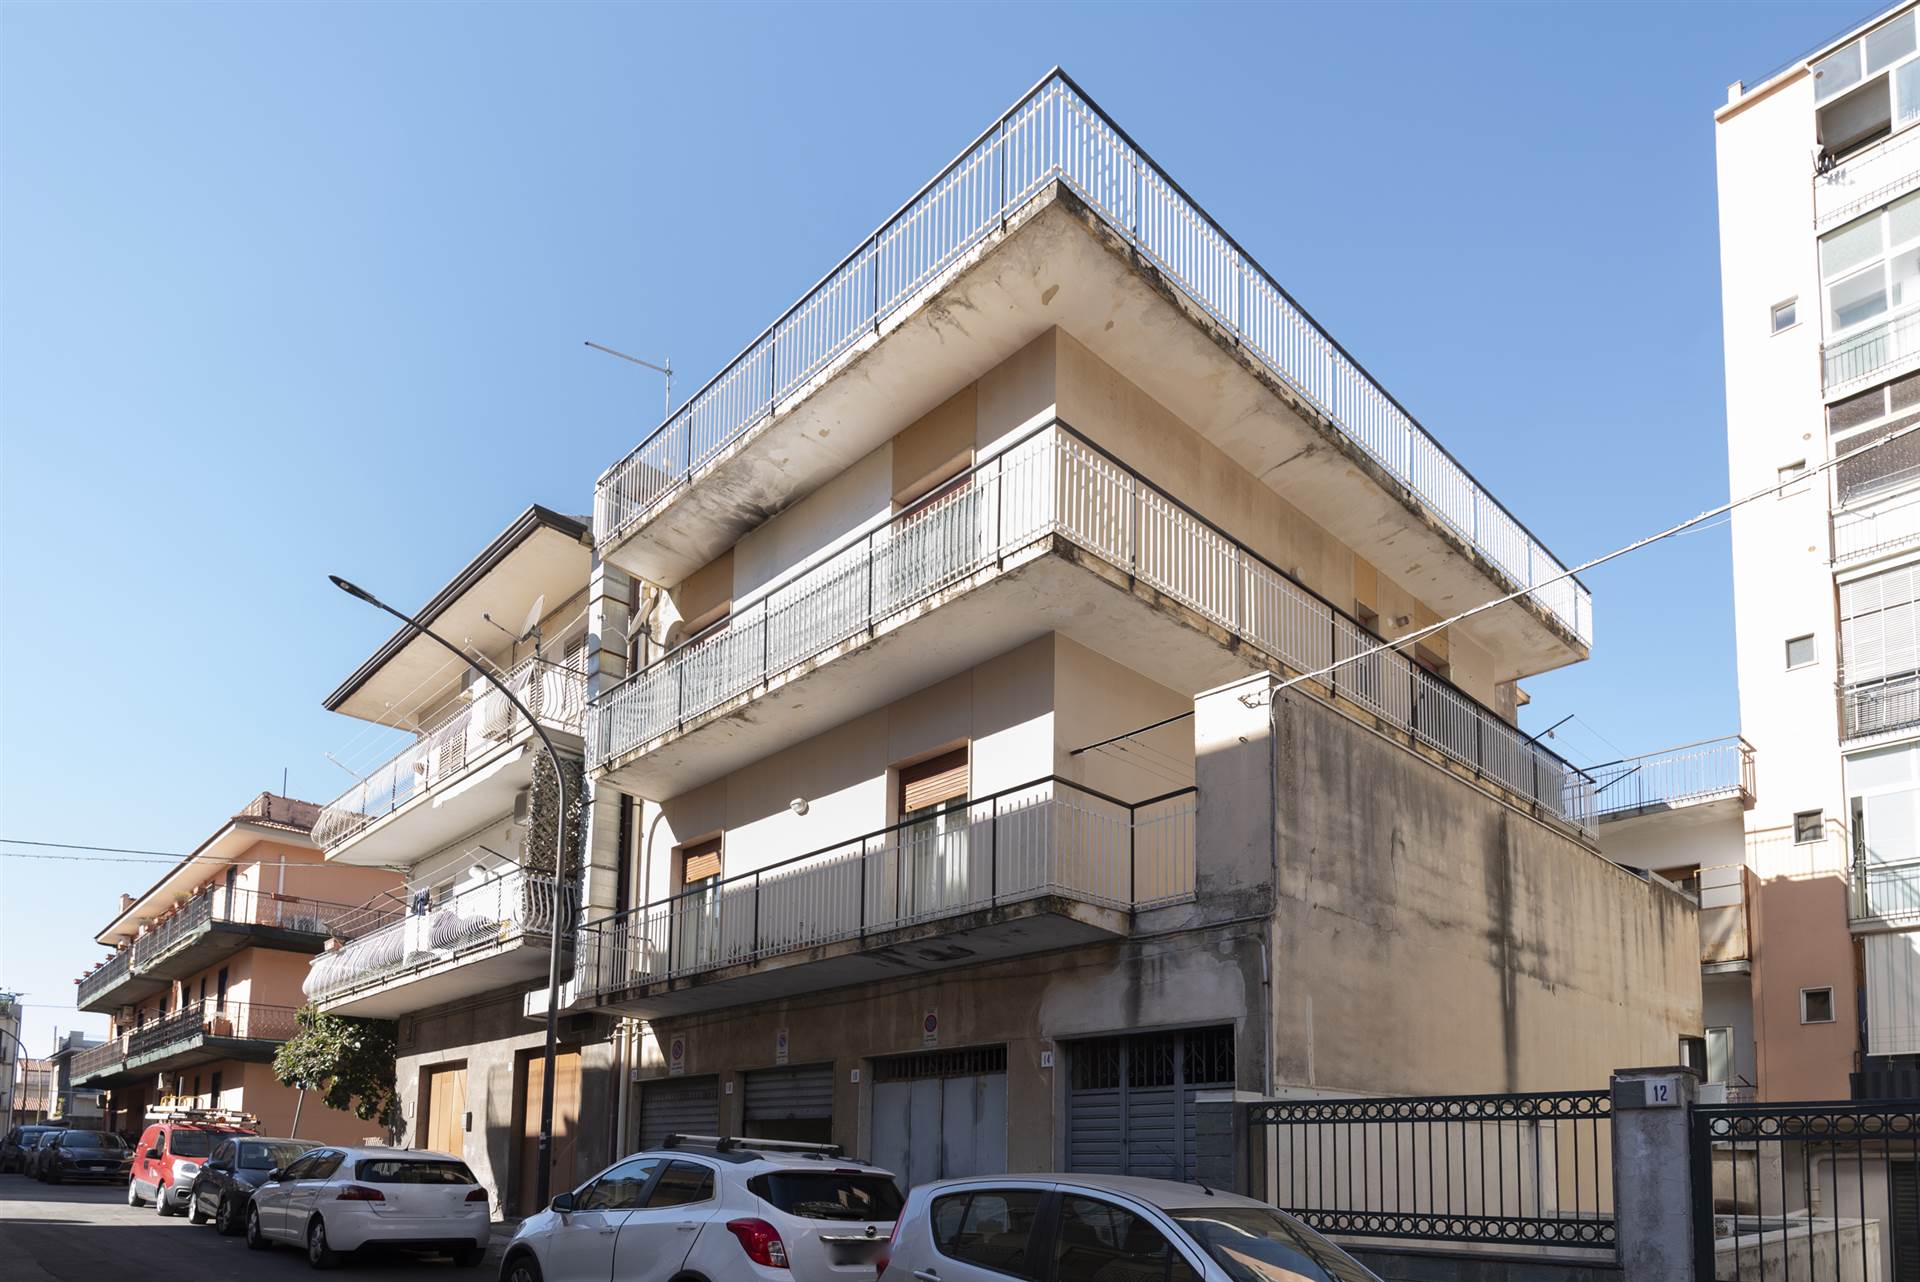 VALVERDE, Apartment for sale of 98 Sq. mt., Habitable, Heating Non-existent, Energetic class: E, Epi: 127,49 kwh/m2 year, placed at 2° on 3, composed 